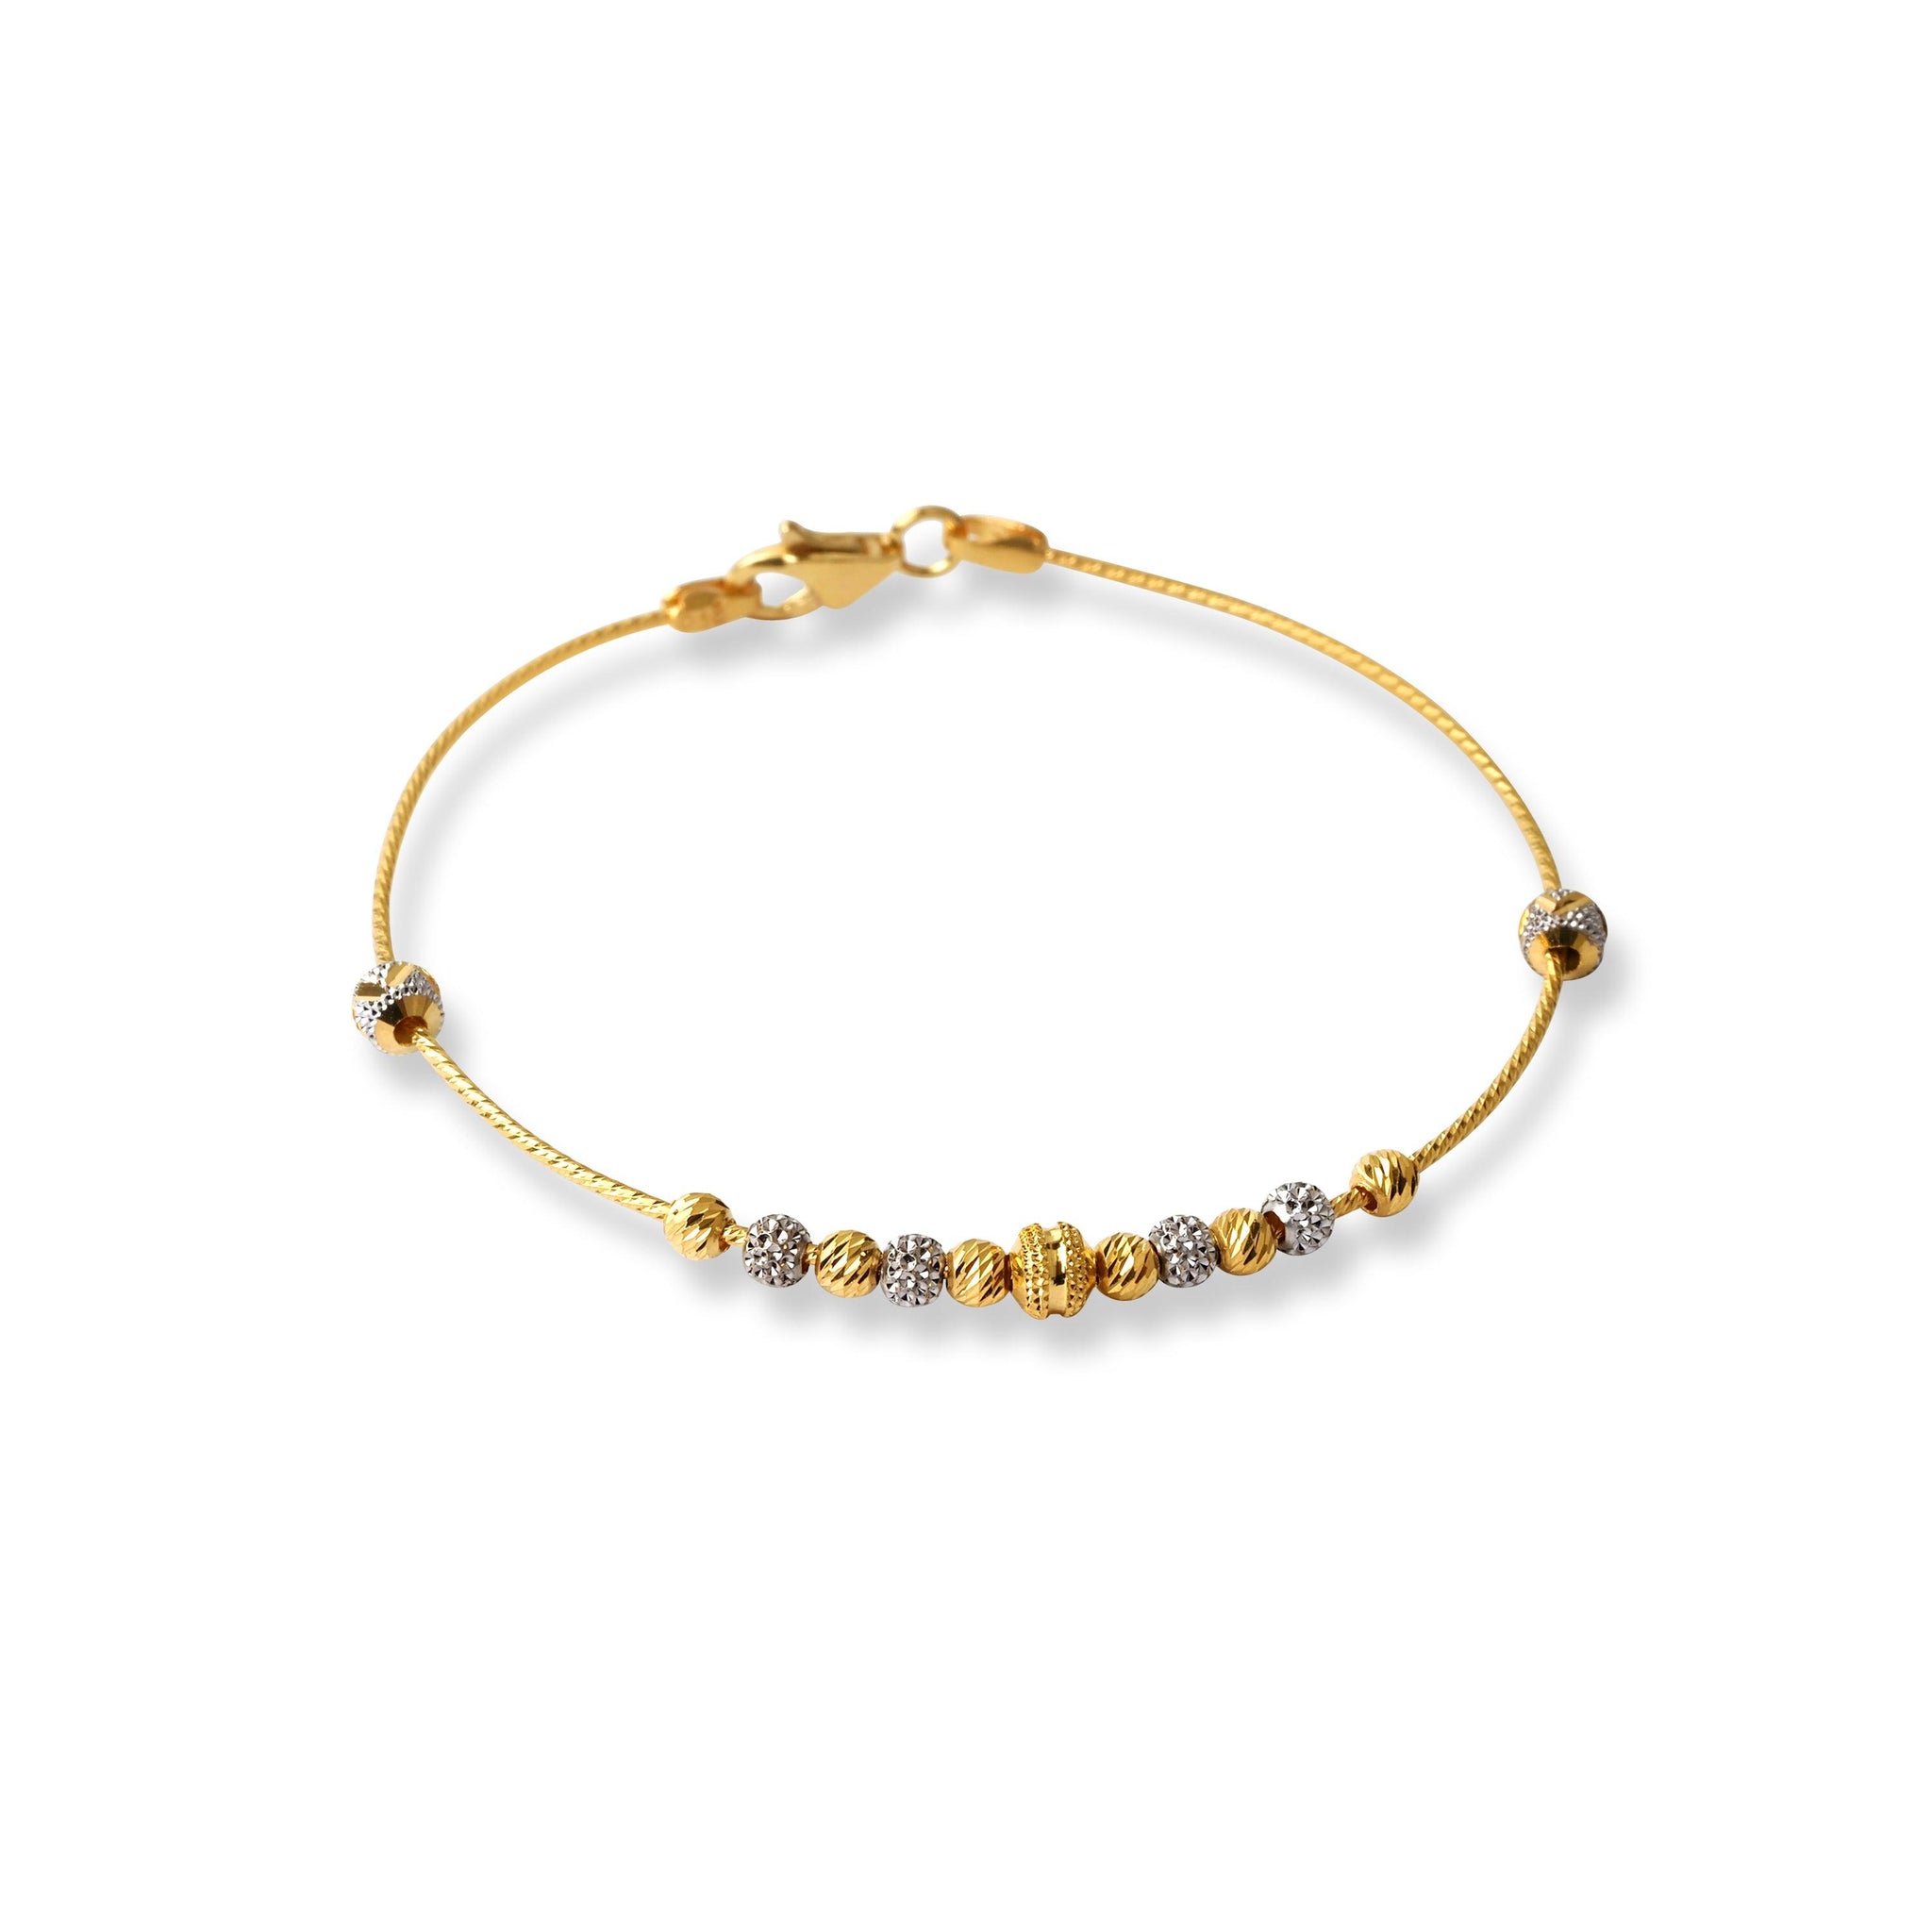 22ct Gold Rhodium Plated Beads Bangle With Rounded Trigger Clasp (4.2g) B-8527